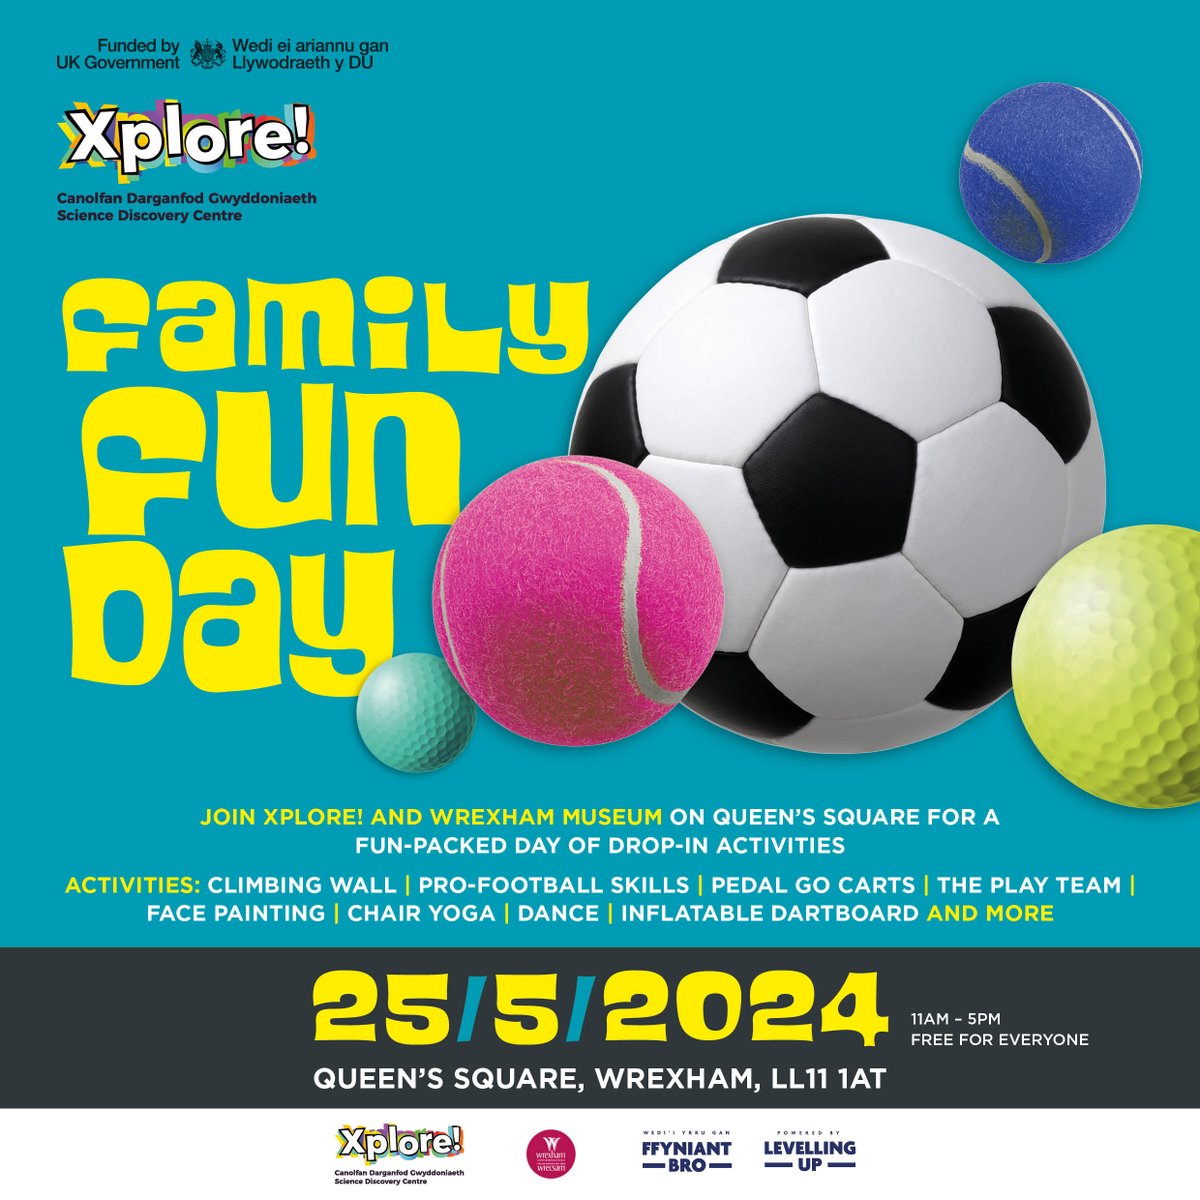 Xplore! are back with another Free family funday, and this time we're teaming up with Wrexham Museums for a day looking at all things sports and science! thanks to funding from Shared Prosperity! 📍 Queen's Square, Wrexham 🎟️ Free activities and surprises on the day!